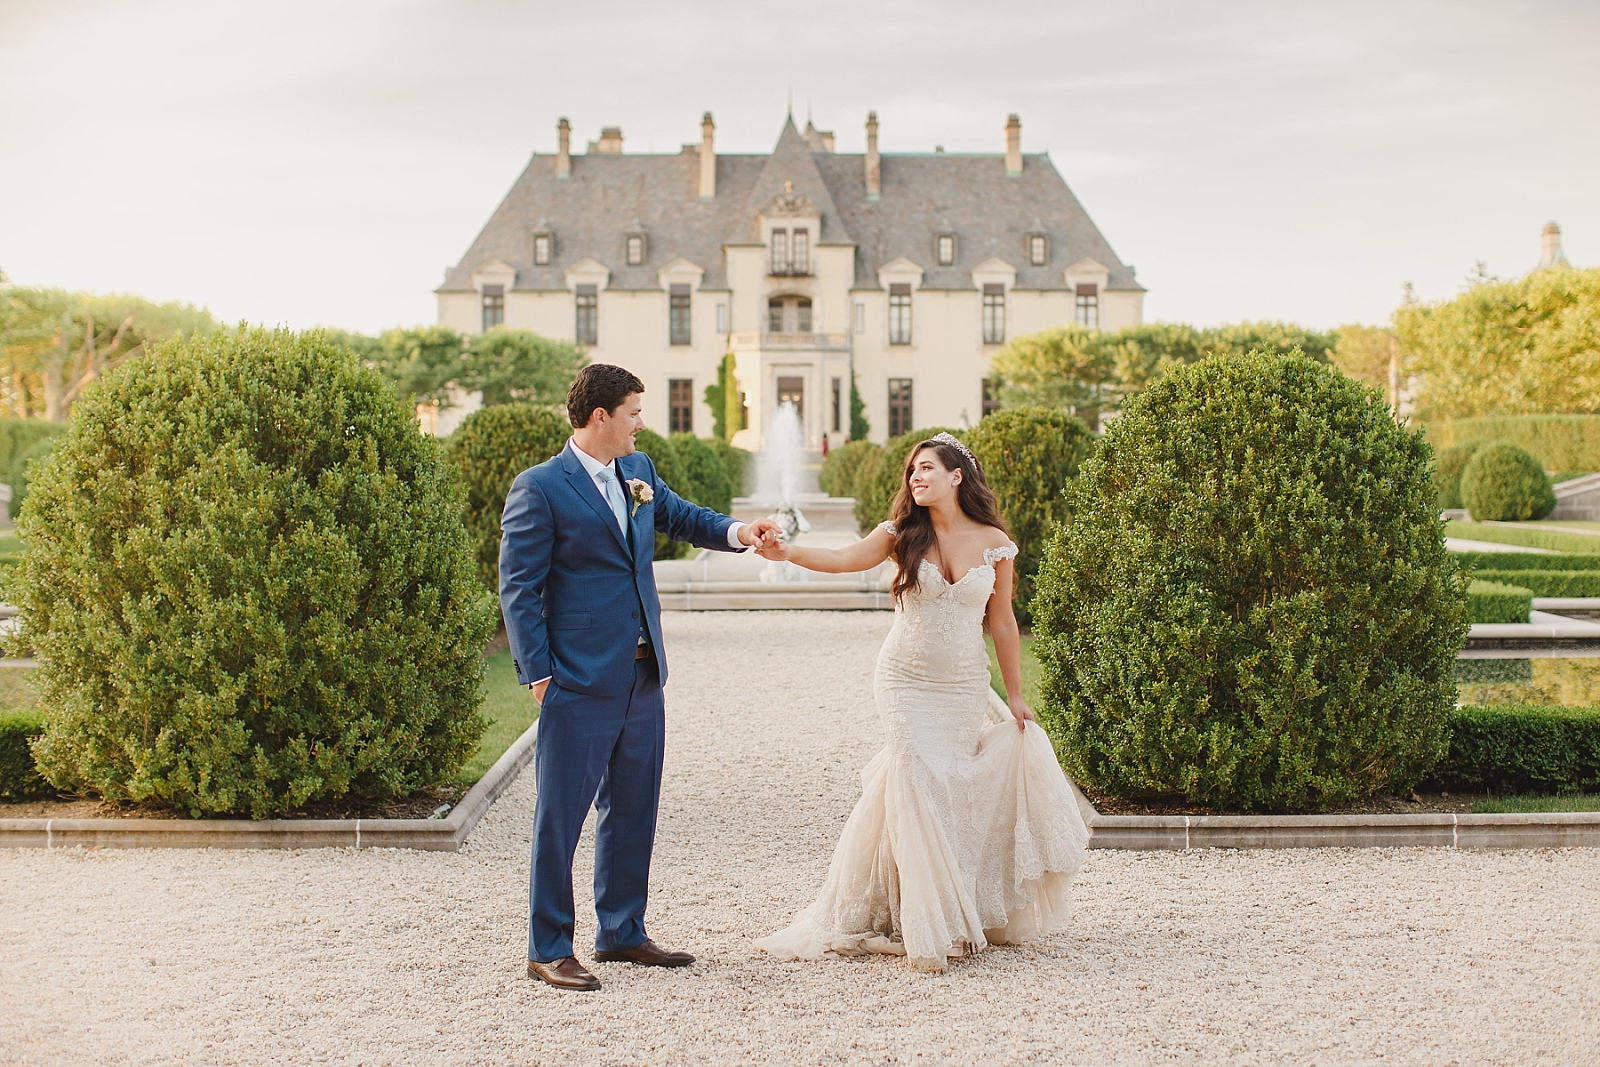 Fairytale portrait of couple dancing in front of Oheka Castle in Long Island NY